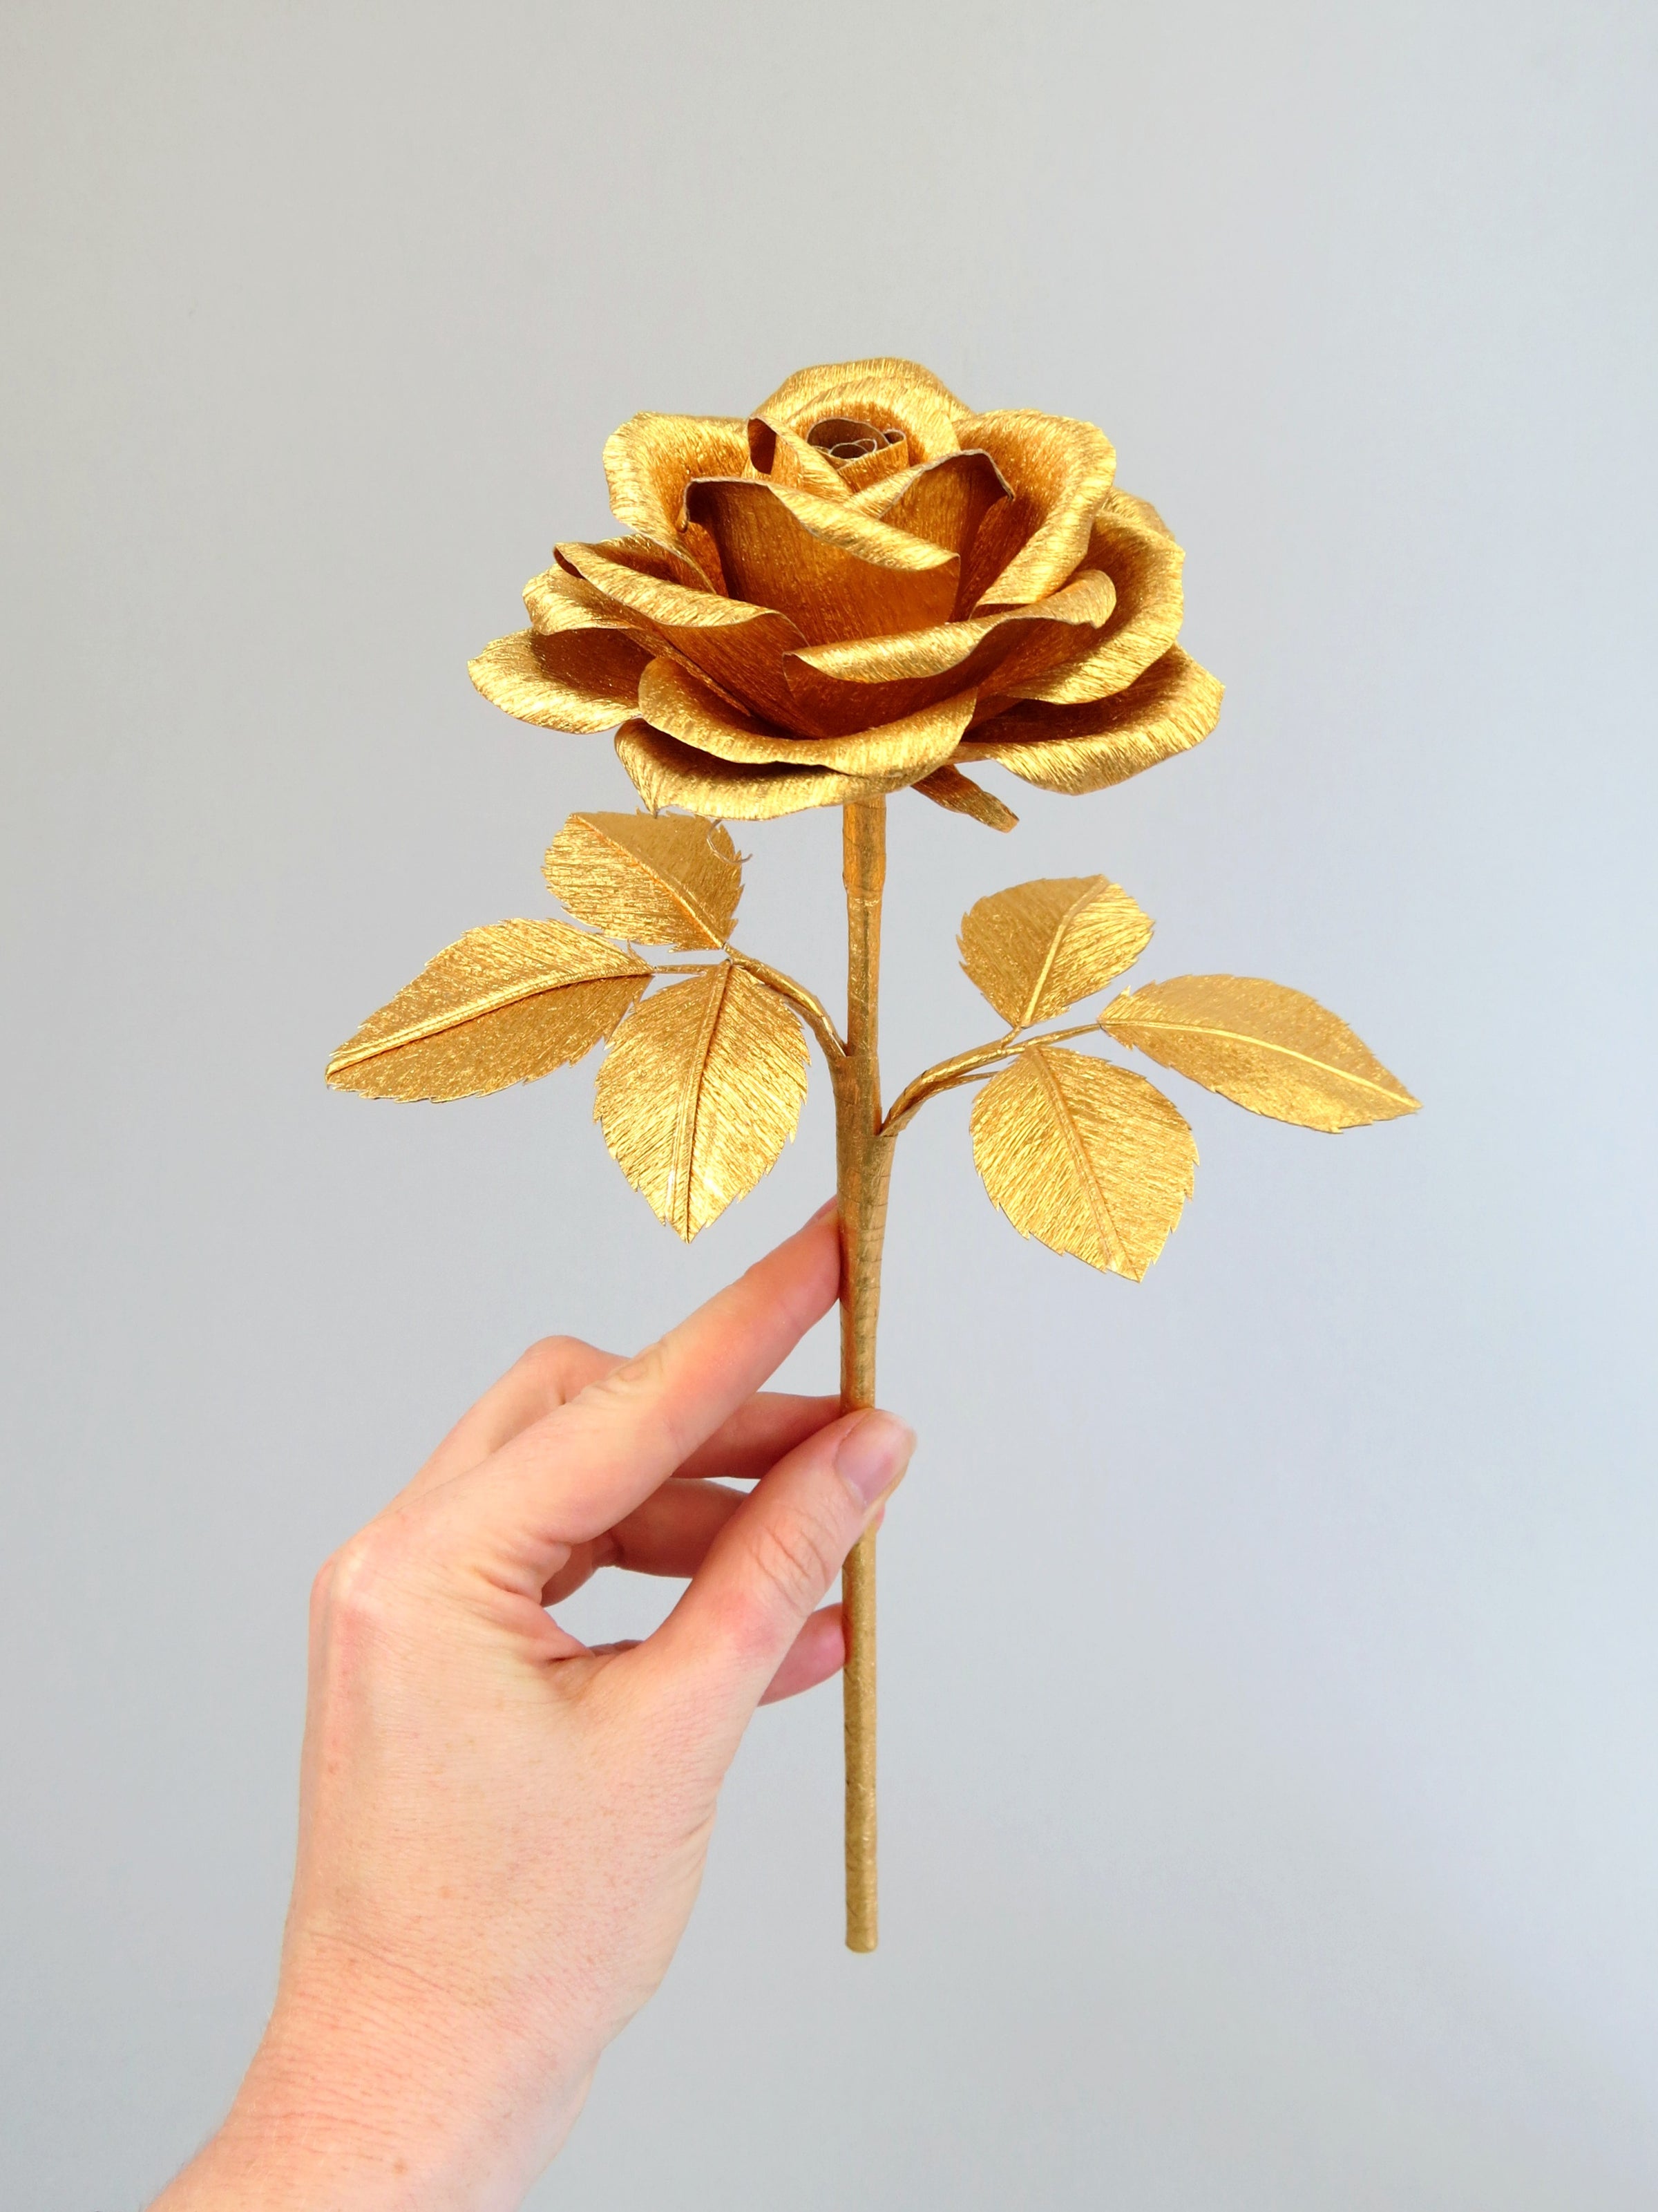 Pale white hand delicately holding the stem of a gold paper rose with six gold leaves